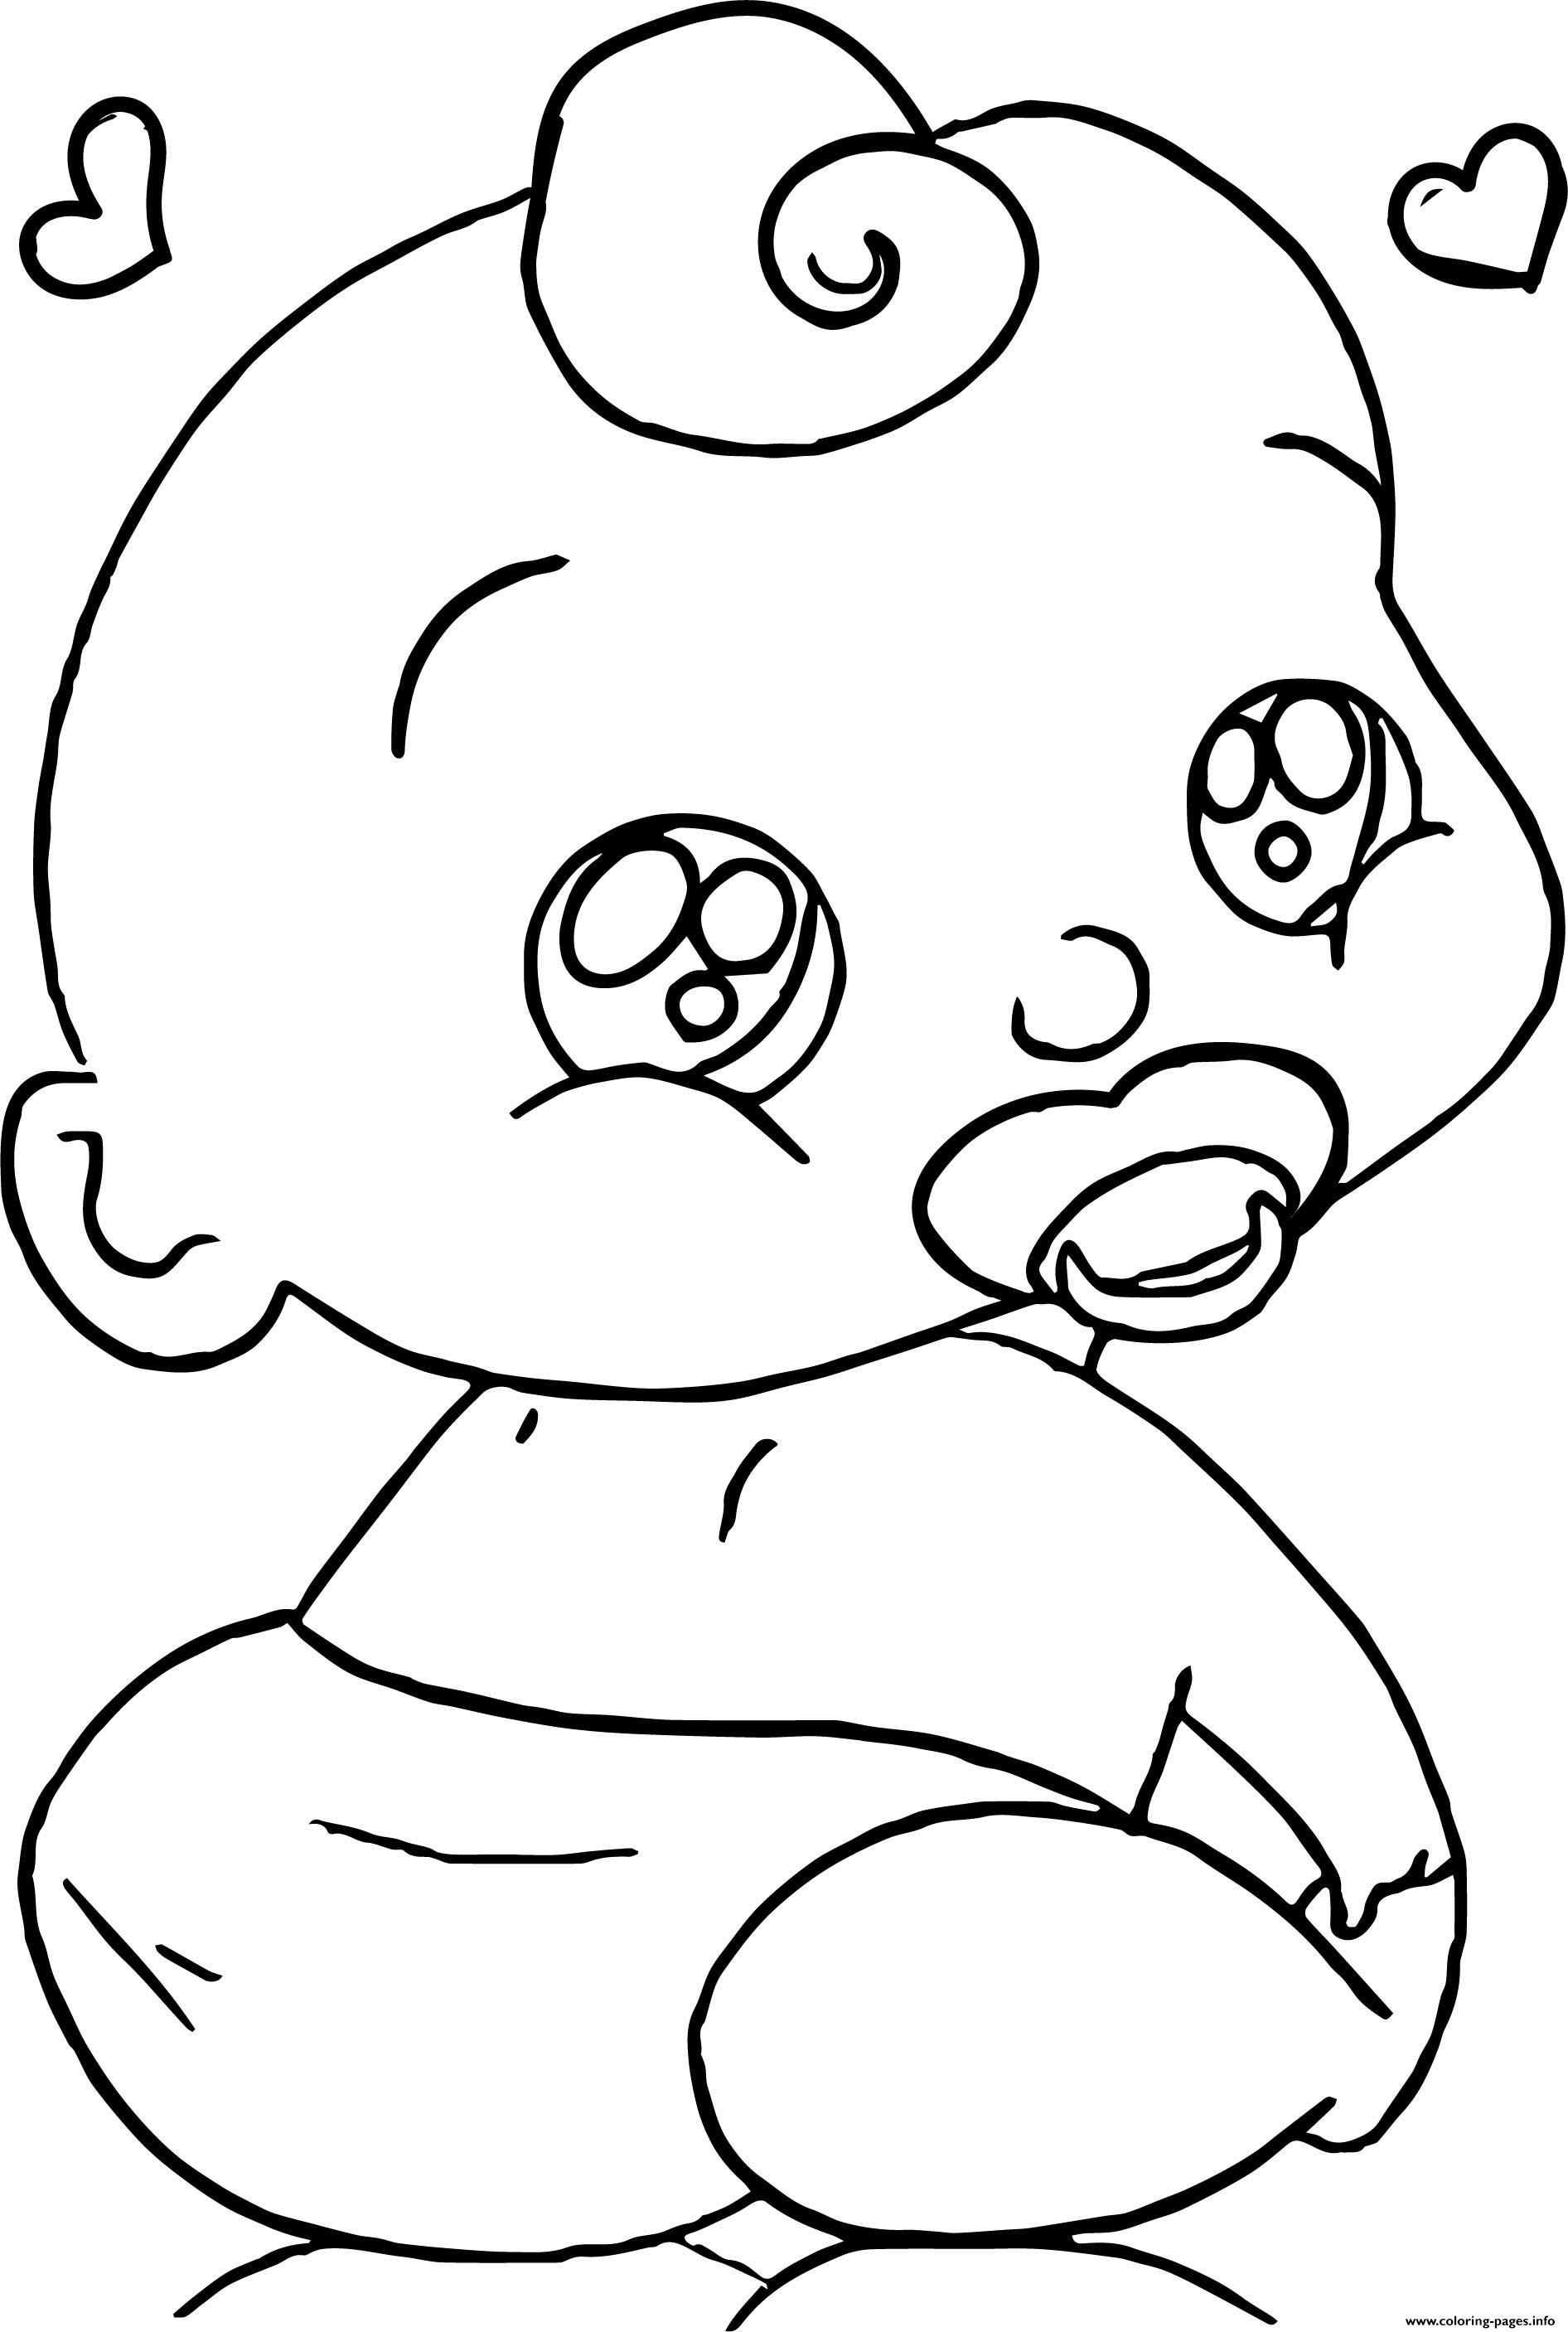 Baby Pictures Coloring Pages Pdf - Printable Baby Pictures Coloring Pages